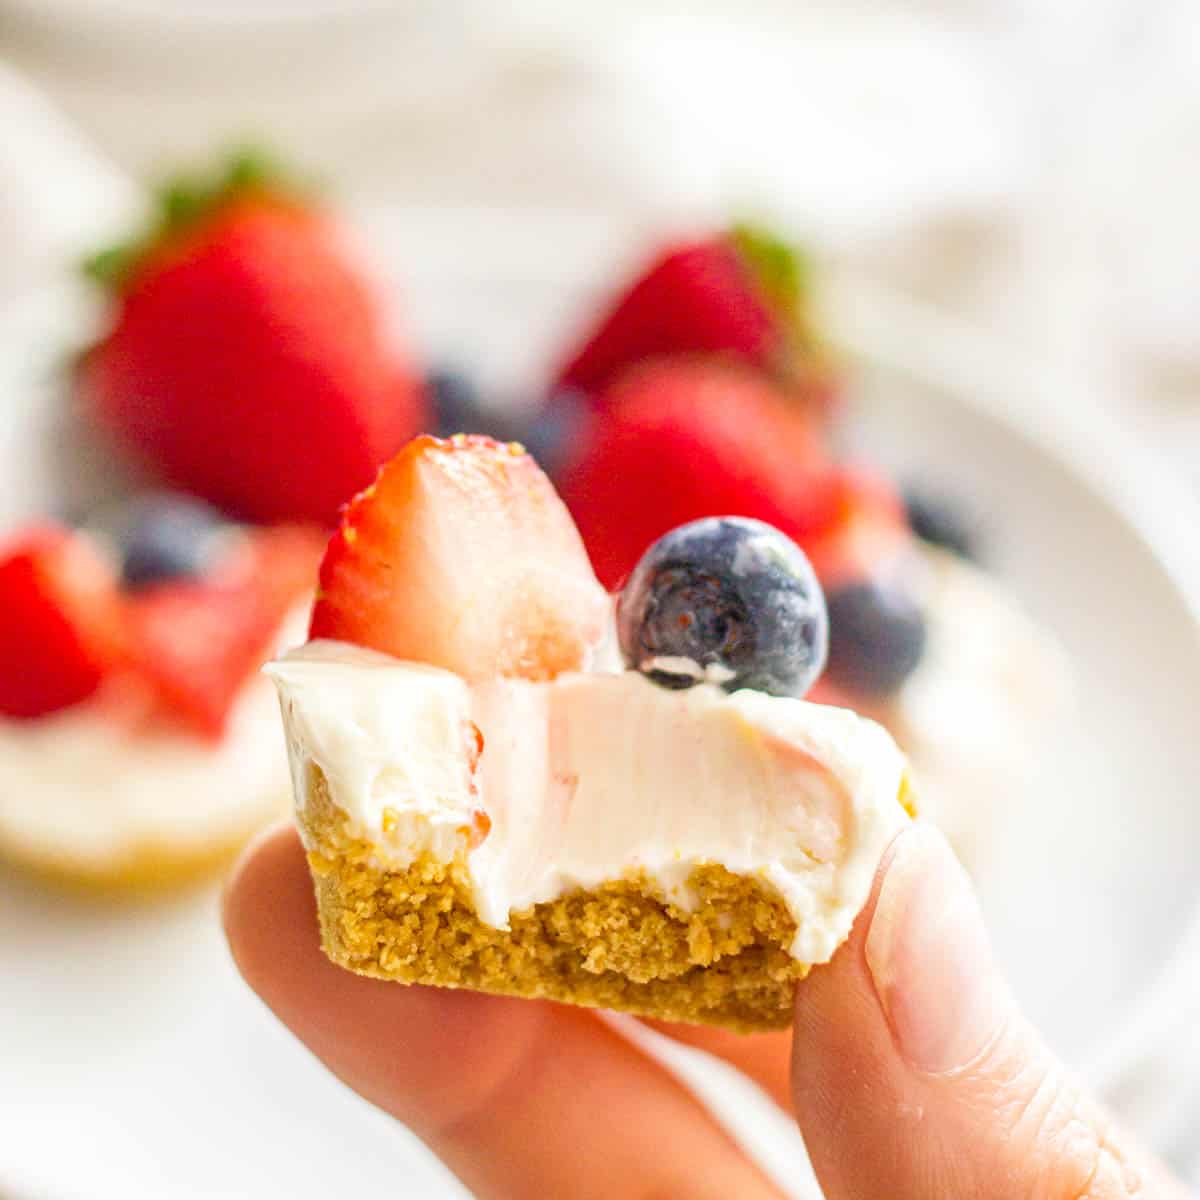 A hand holding a mini cheesecake with fruit on top and a bite taken out.